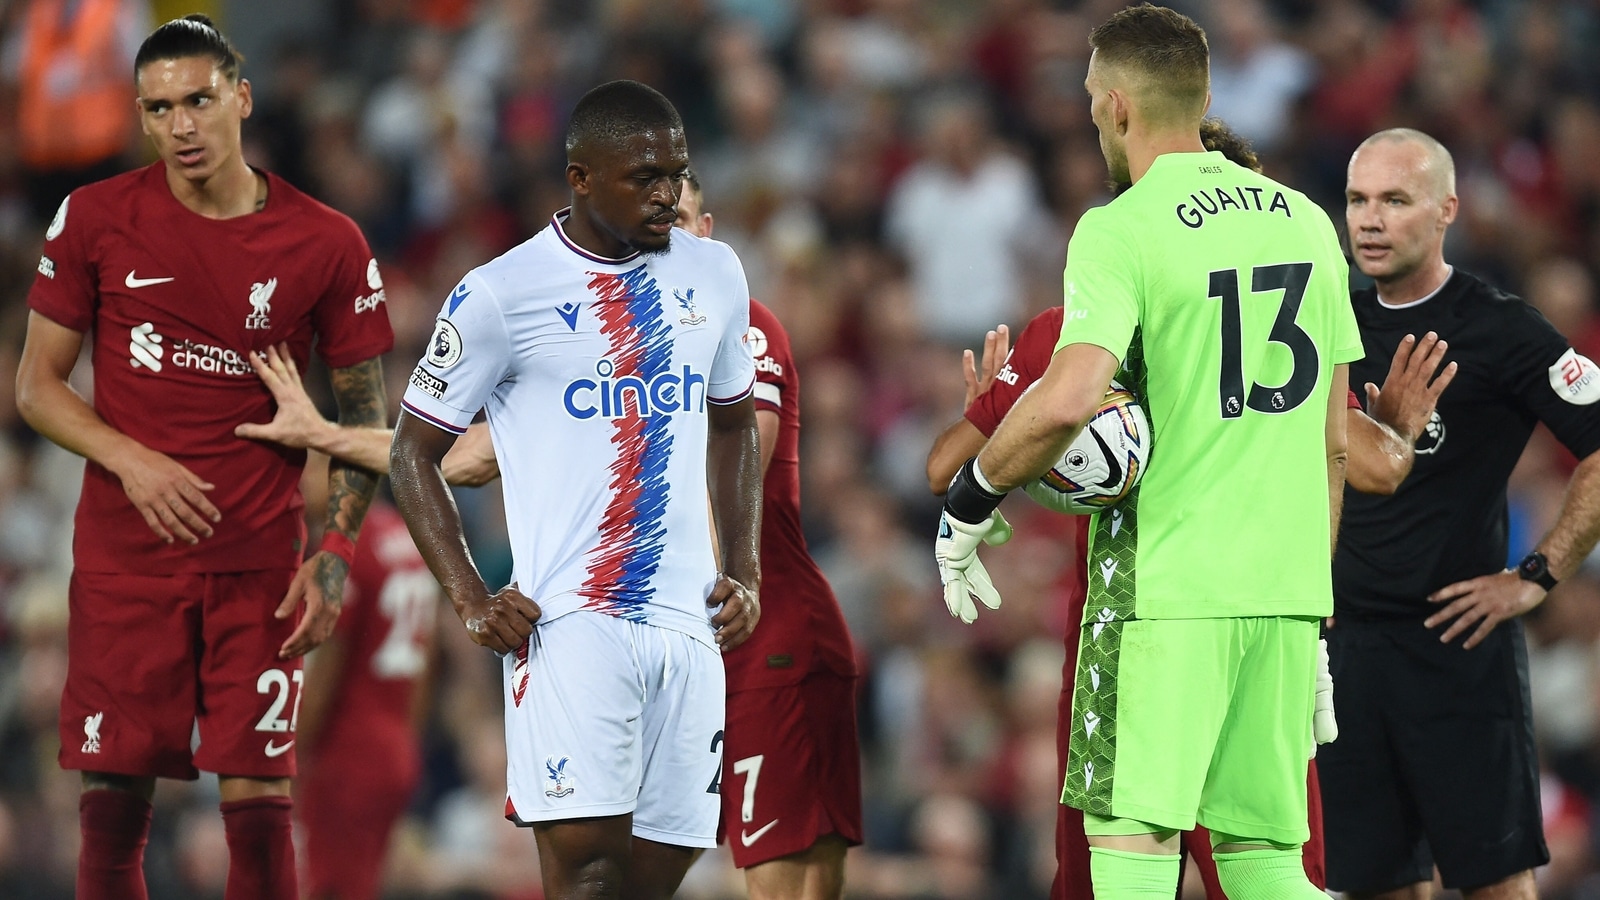 Crystal Palace defender Joachim Andersen receives death threats after Nunez red card